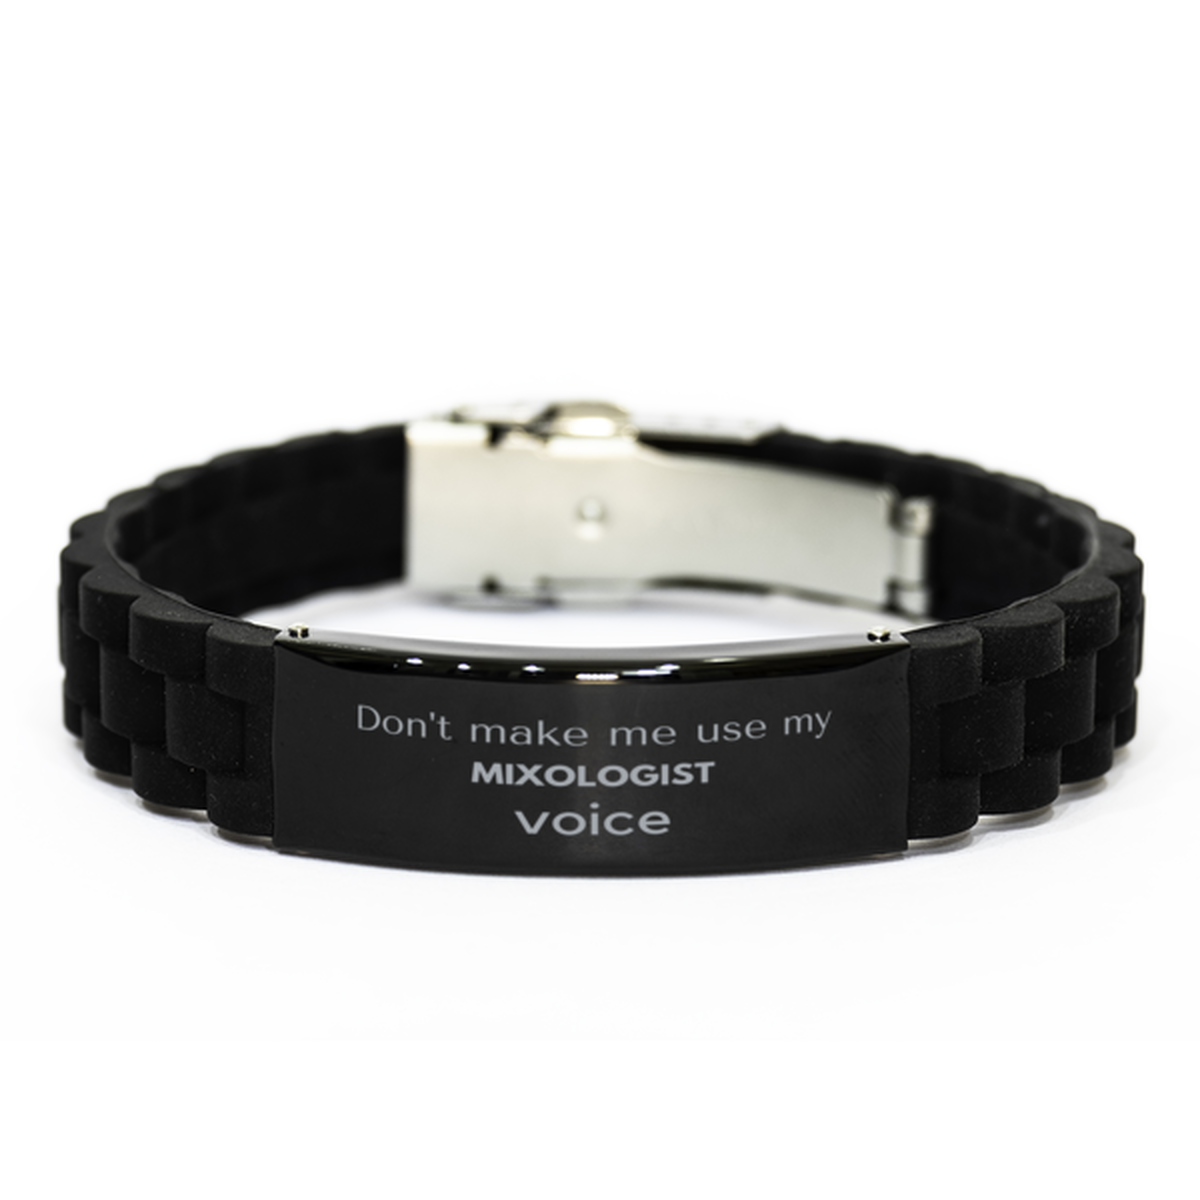 Don't make me use my Mixologist voice, Sarcasm Mixologist Gifts, Christmas Mixologist Black Glidelock Clasp Bracelet Birthday Unique Gifts For Mixologist Coworkers, Men, Women, Colleague, Friends